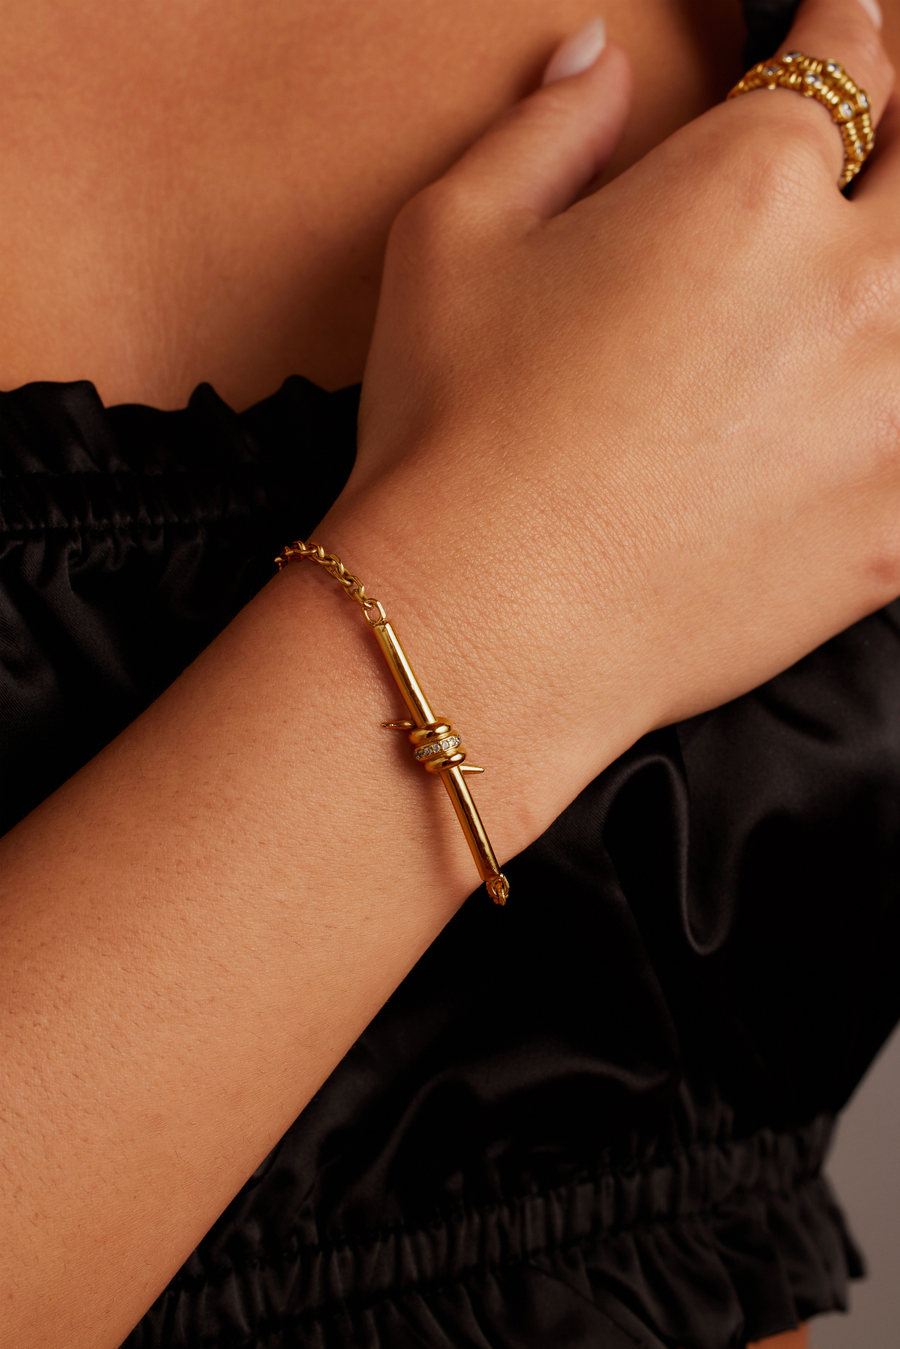 Woman wearing the Last Thorne Bracelet from Thorne Dynasty in gold.